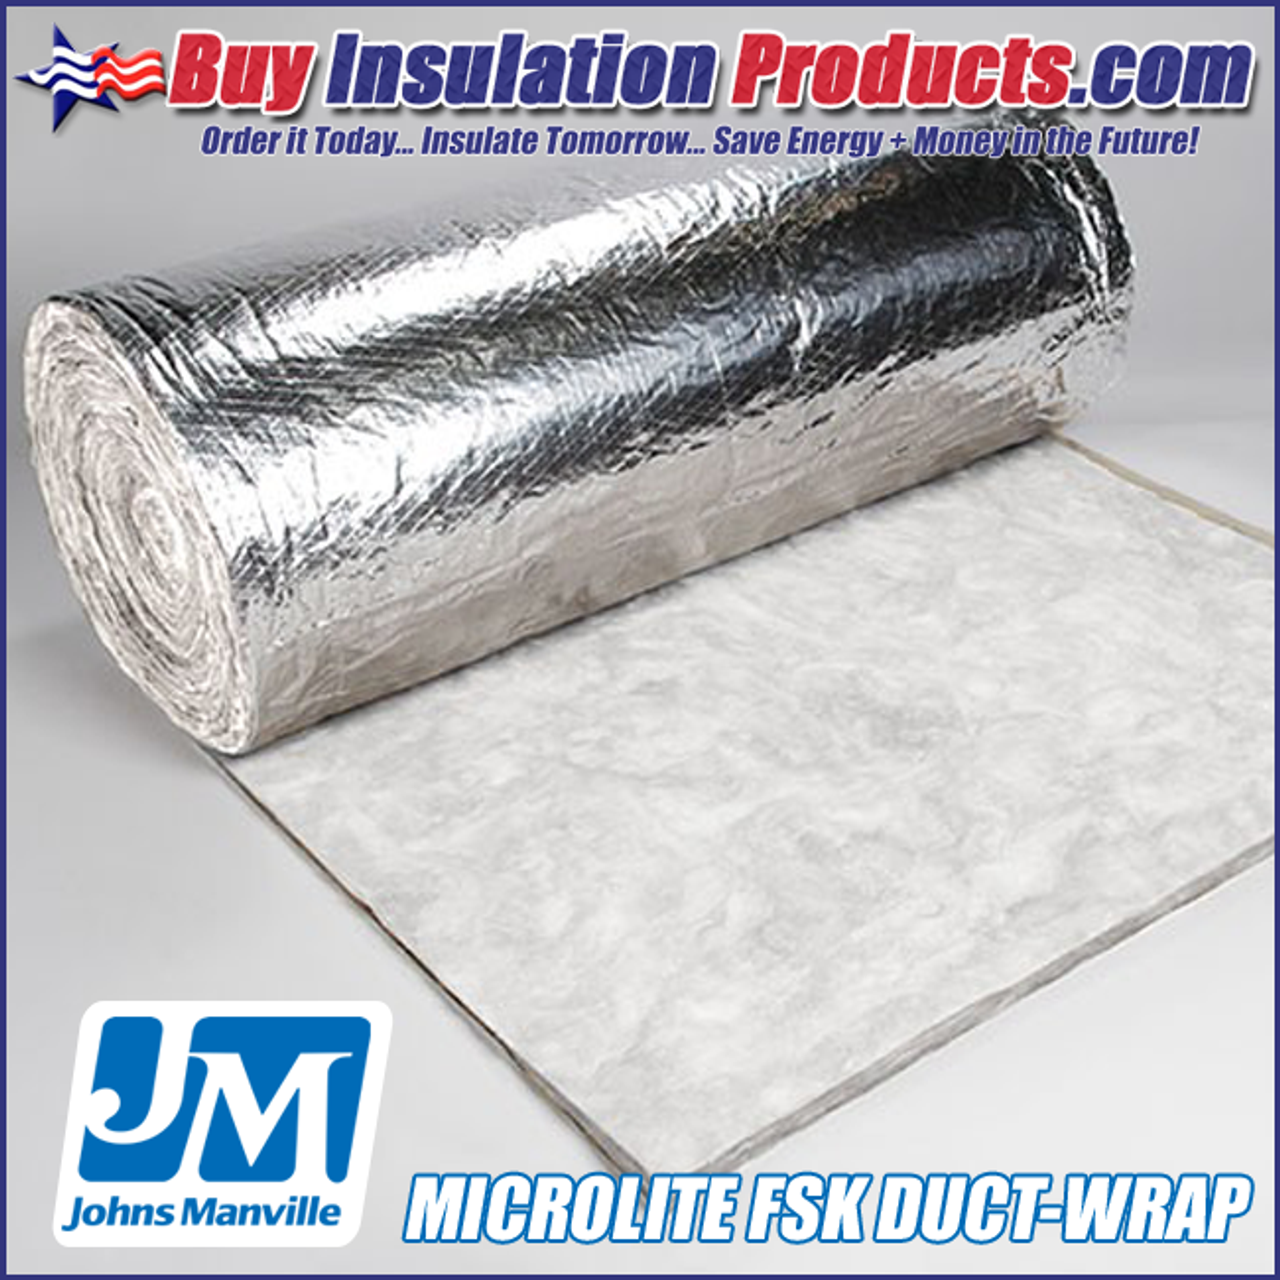 Specialty Metals and Fiberglass Products